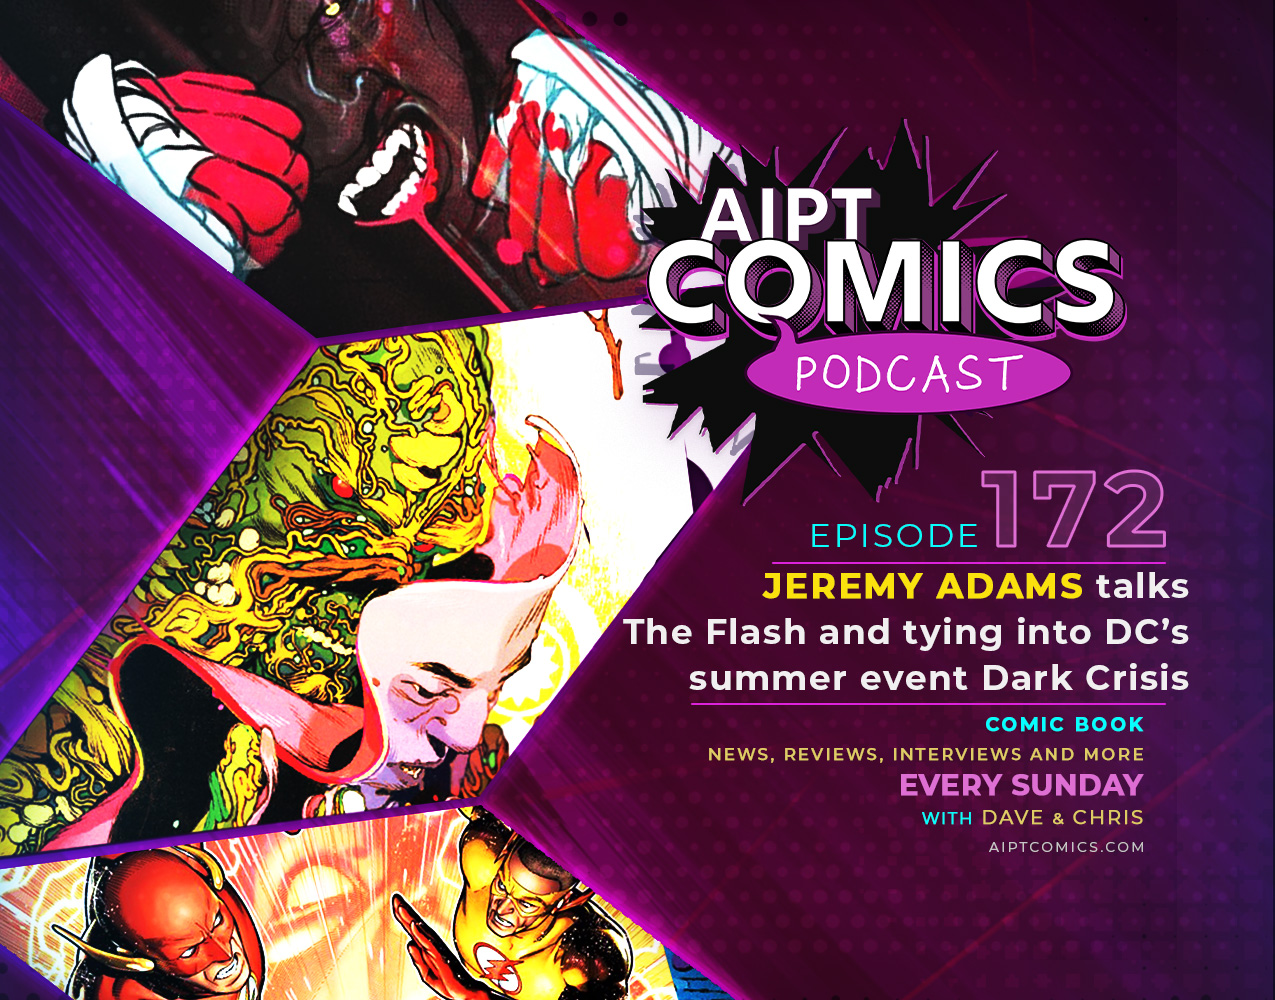 AIPT Comics podcast episode 172: Jeremy Adams talks 'The Flash' and tying into DC’s summer event 'Dark Crisis'